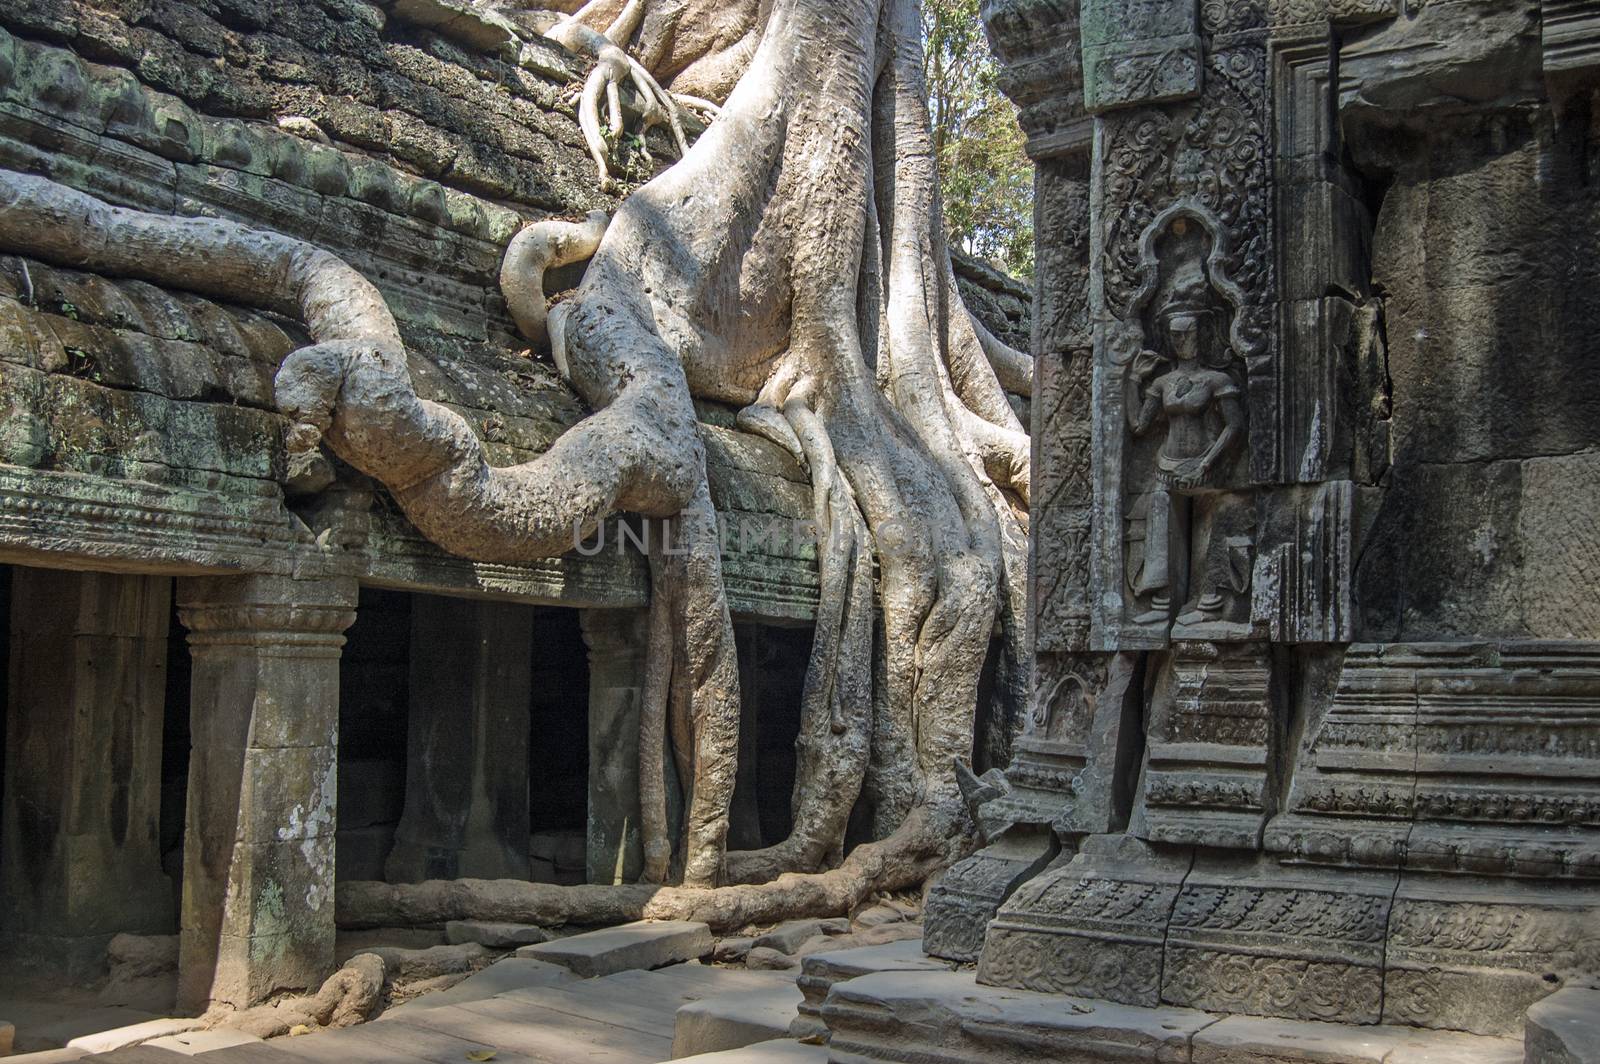 Ta Prohm temple in Angkor, Cambodia. Ancient ruins with a kapok tree, Ceiba pentandra, growing on it.